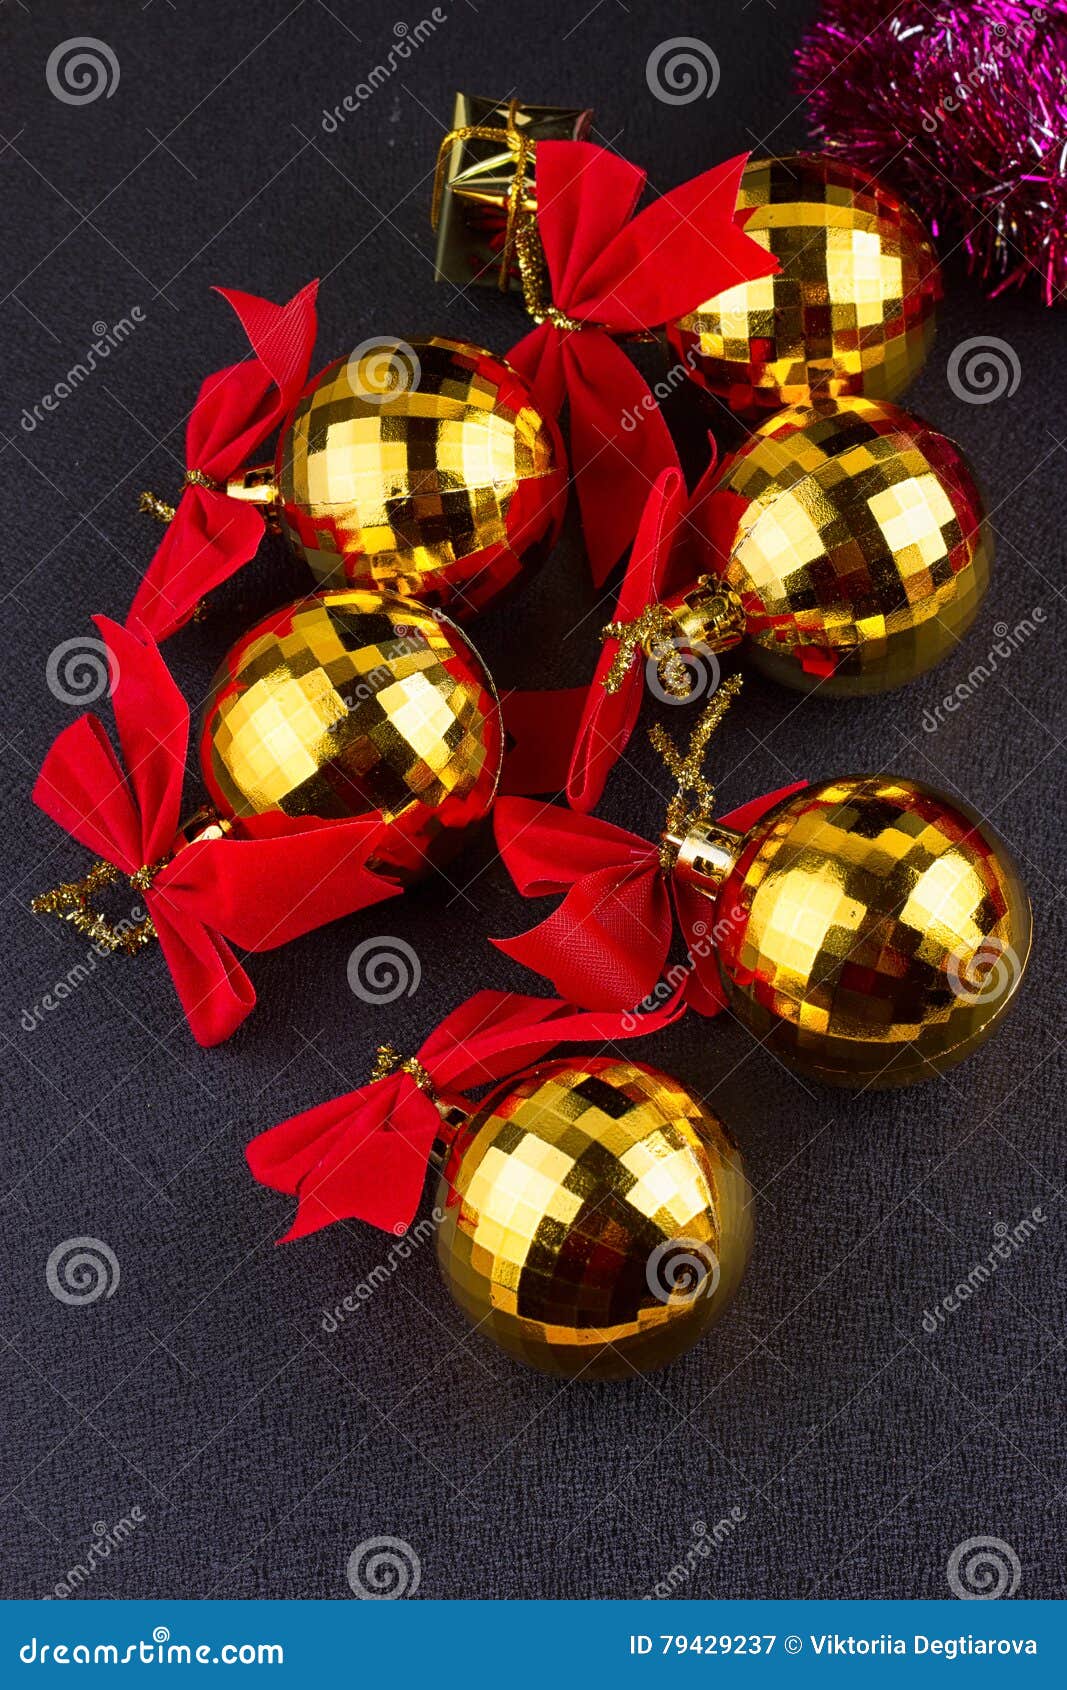 Gold Christmas Balls With Red Ribbons Stock Image - Image of hang ...